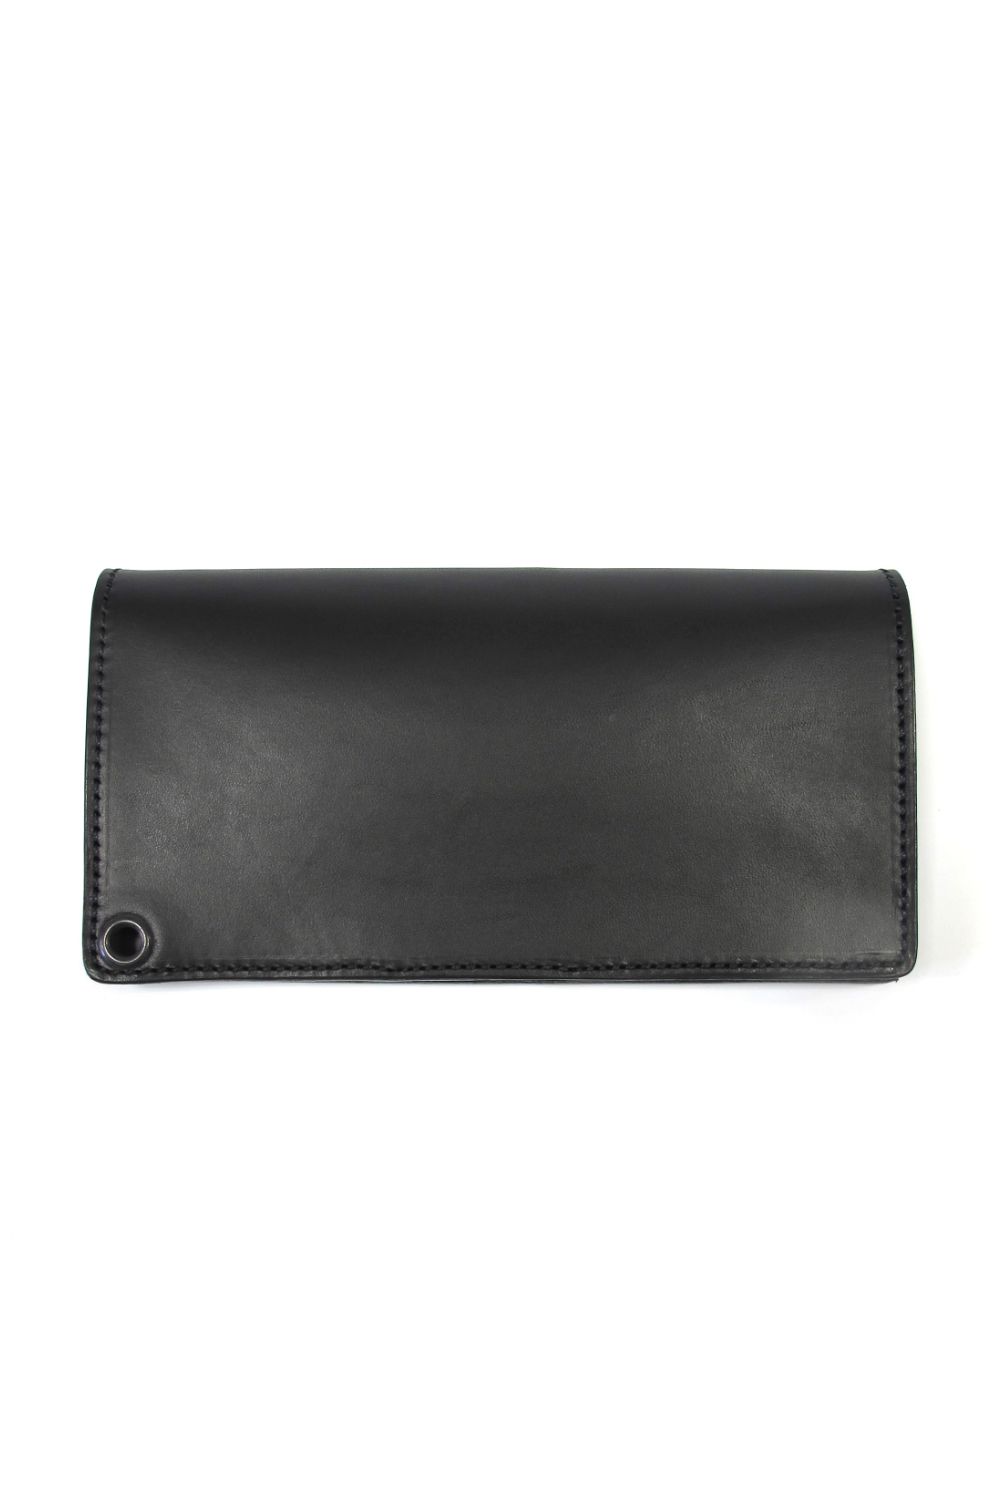 RATS - LEATHER WALLET (BLACK) / ポーター コラボレザー 